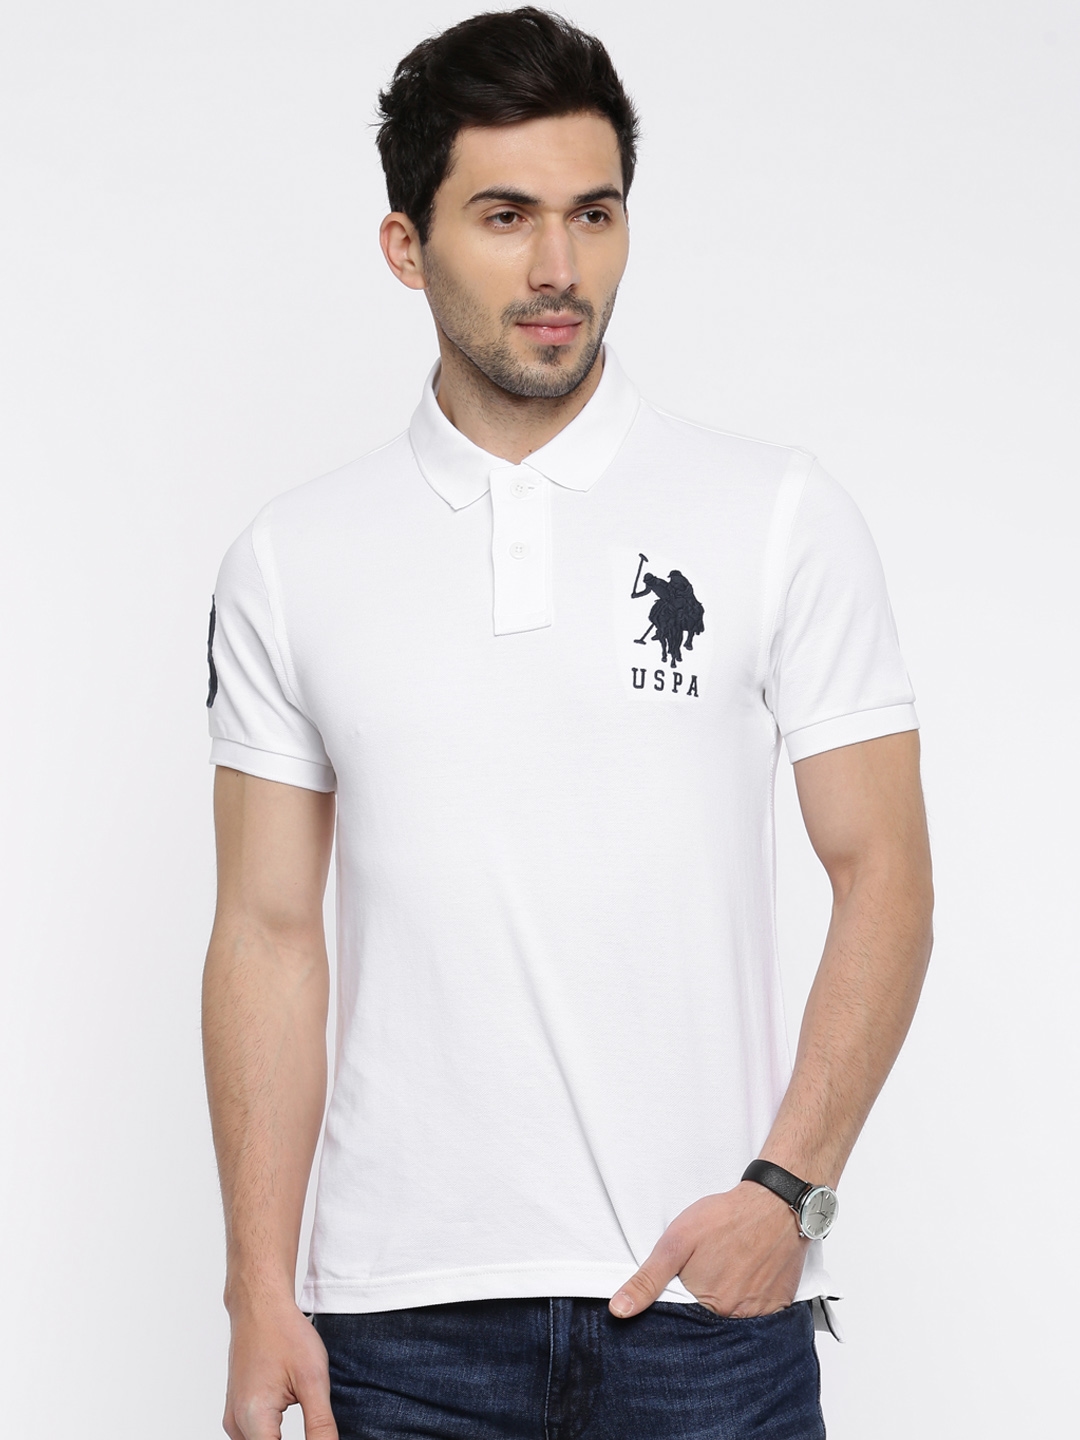 collared t shirt polo